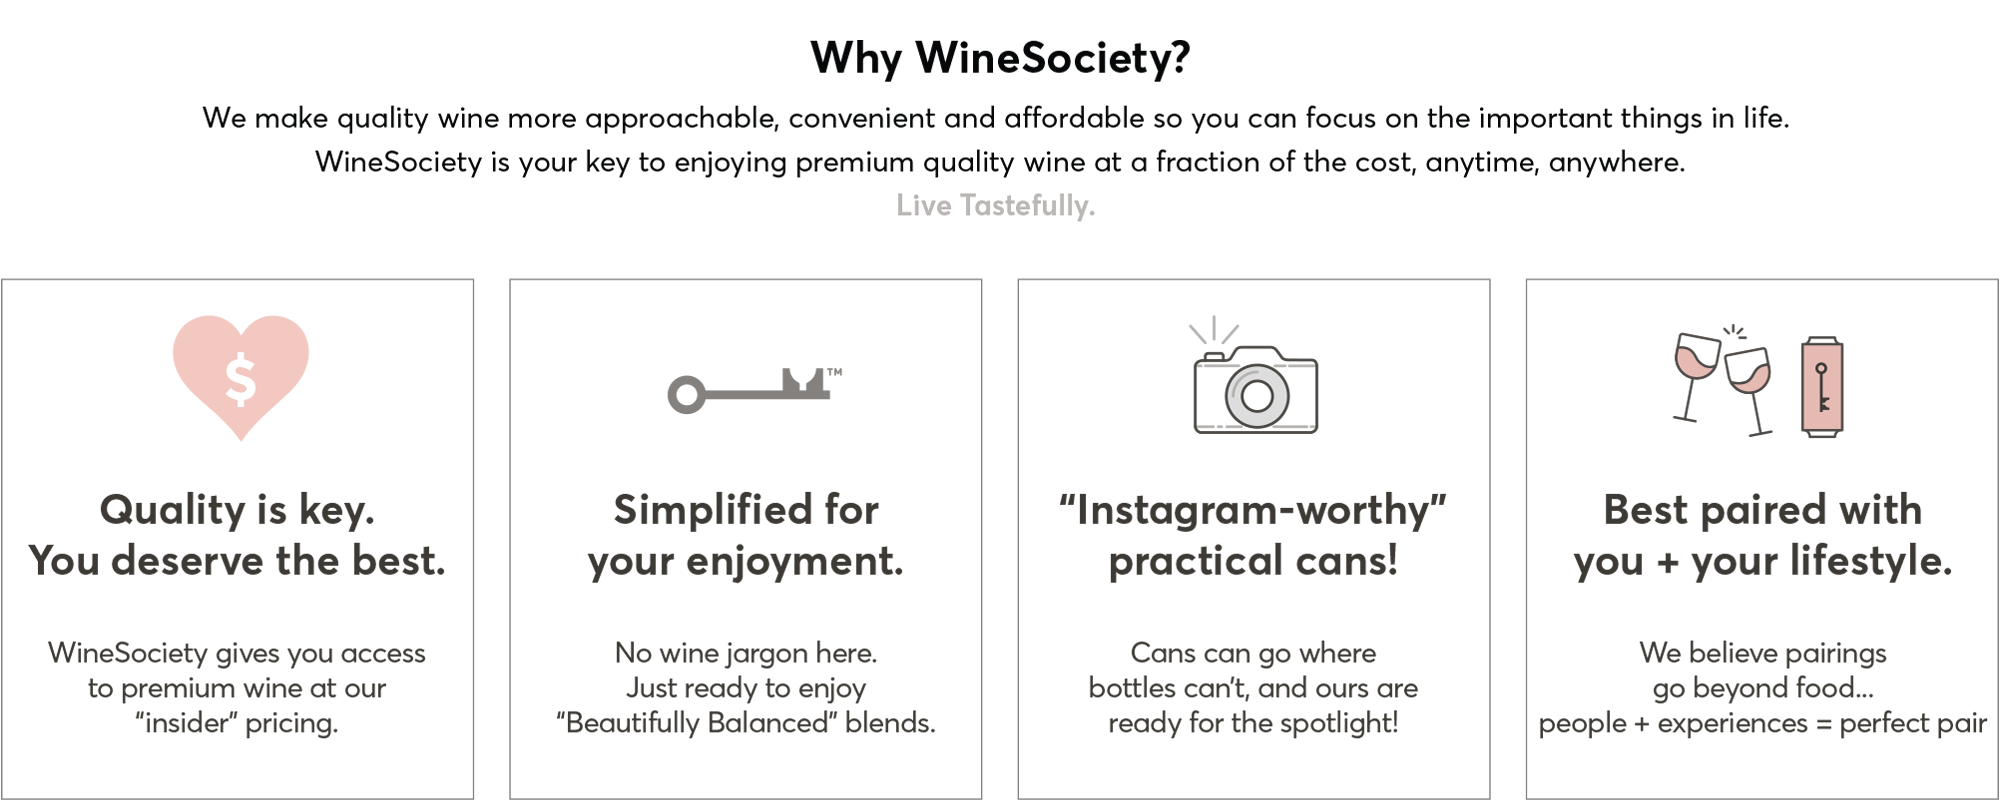 Why WineSociety